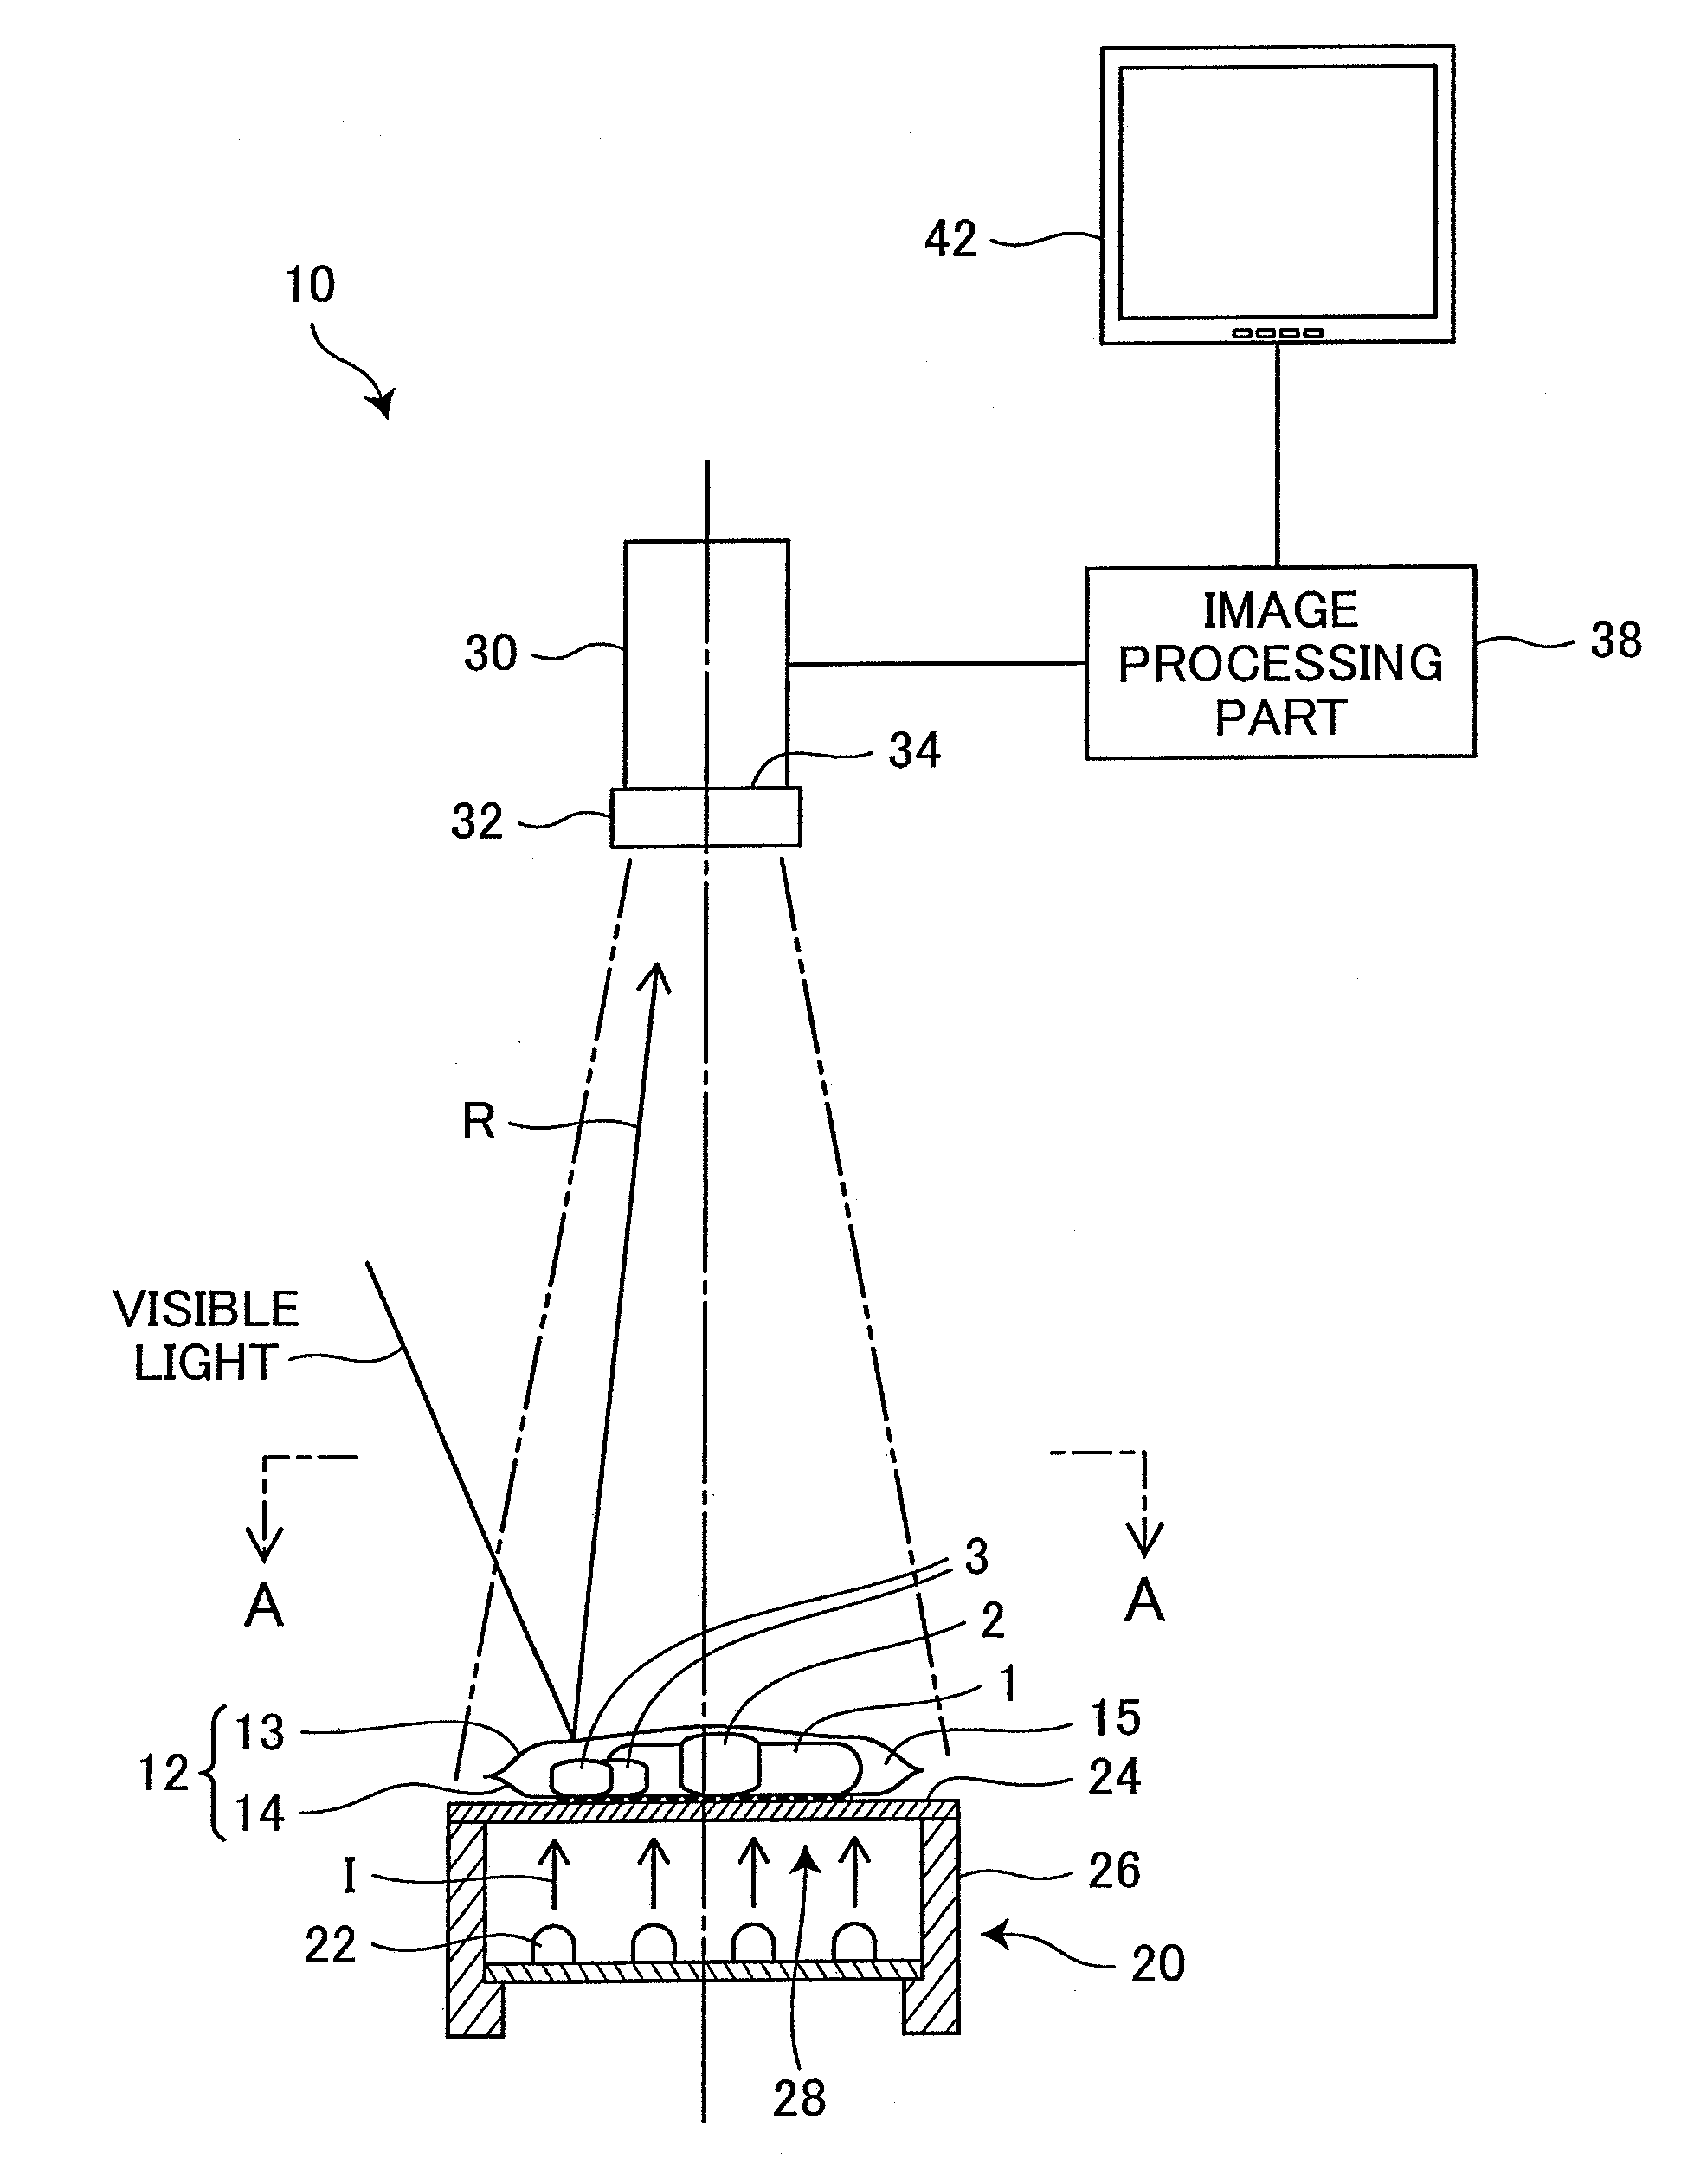 Device for counting the number of medicines in medicine packaging envelope